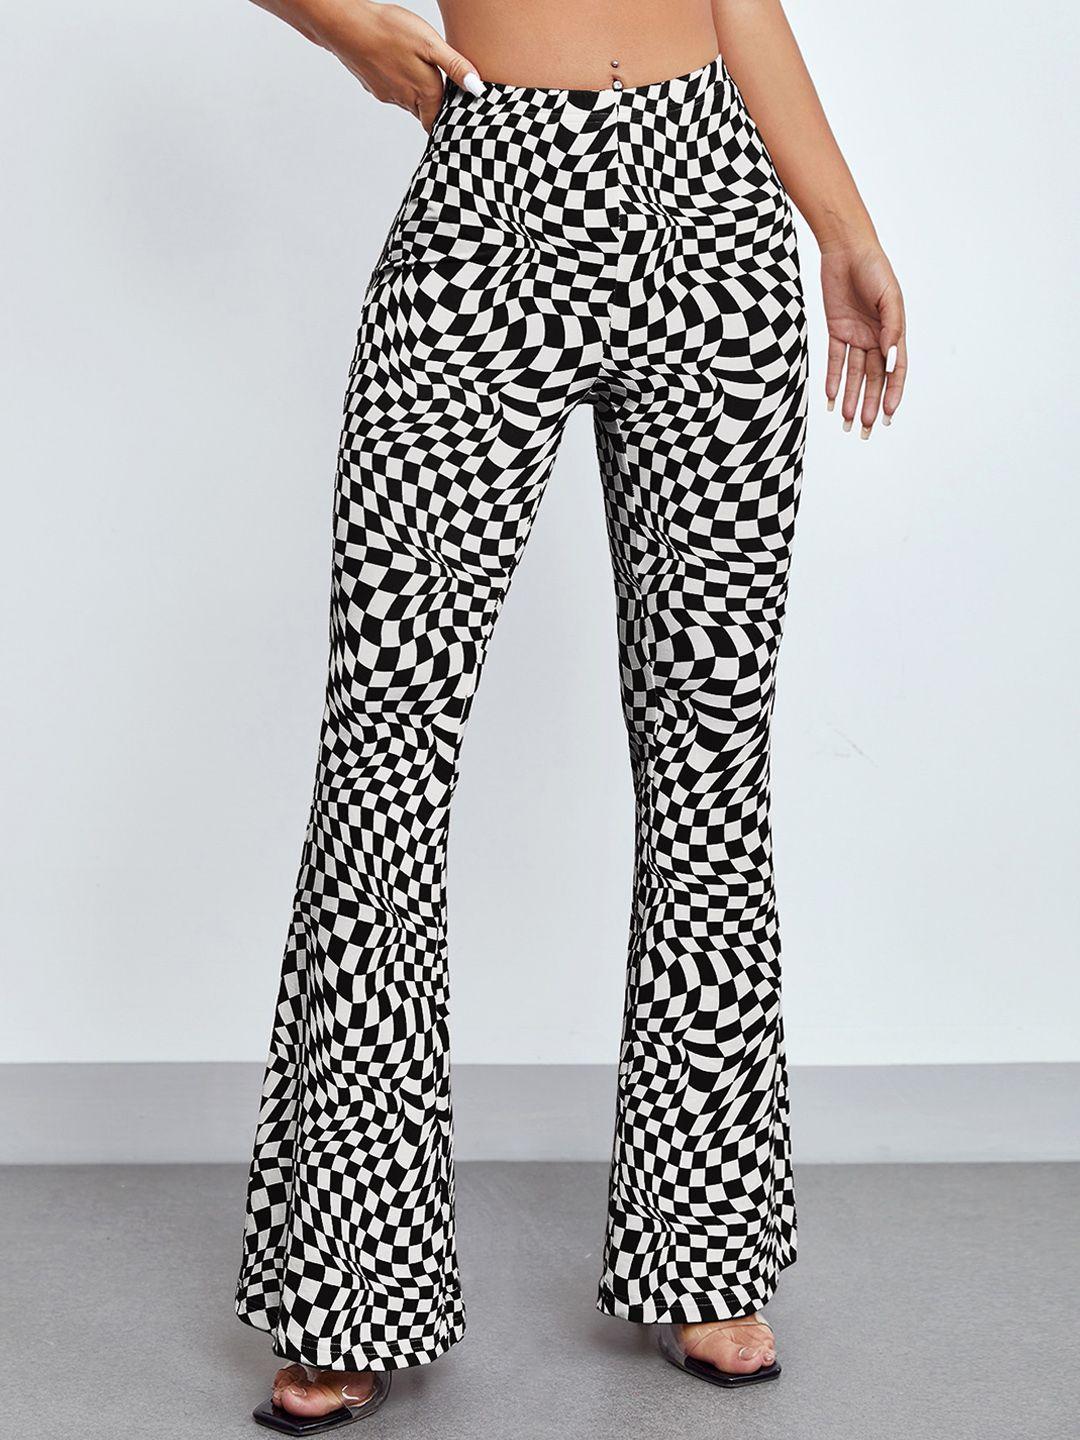 baesd-women-checked-slim-fit-smart-wrinkle-free-bootcut-trousers